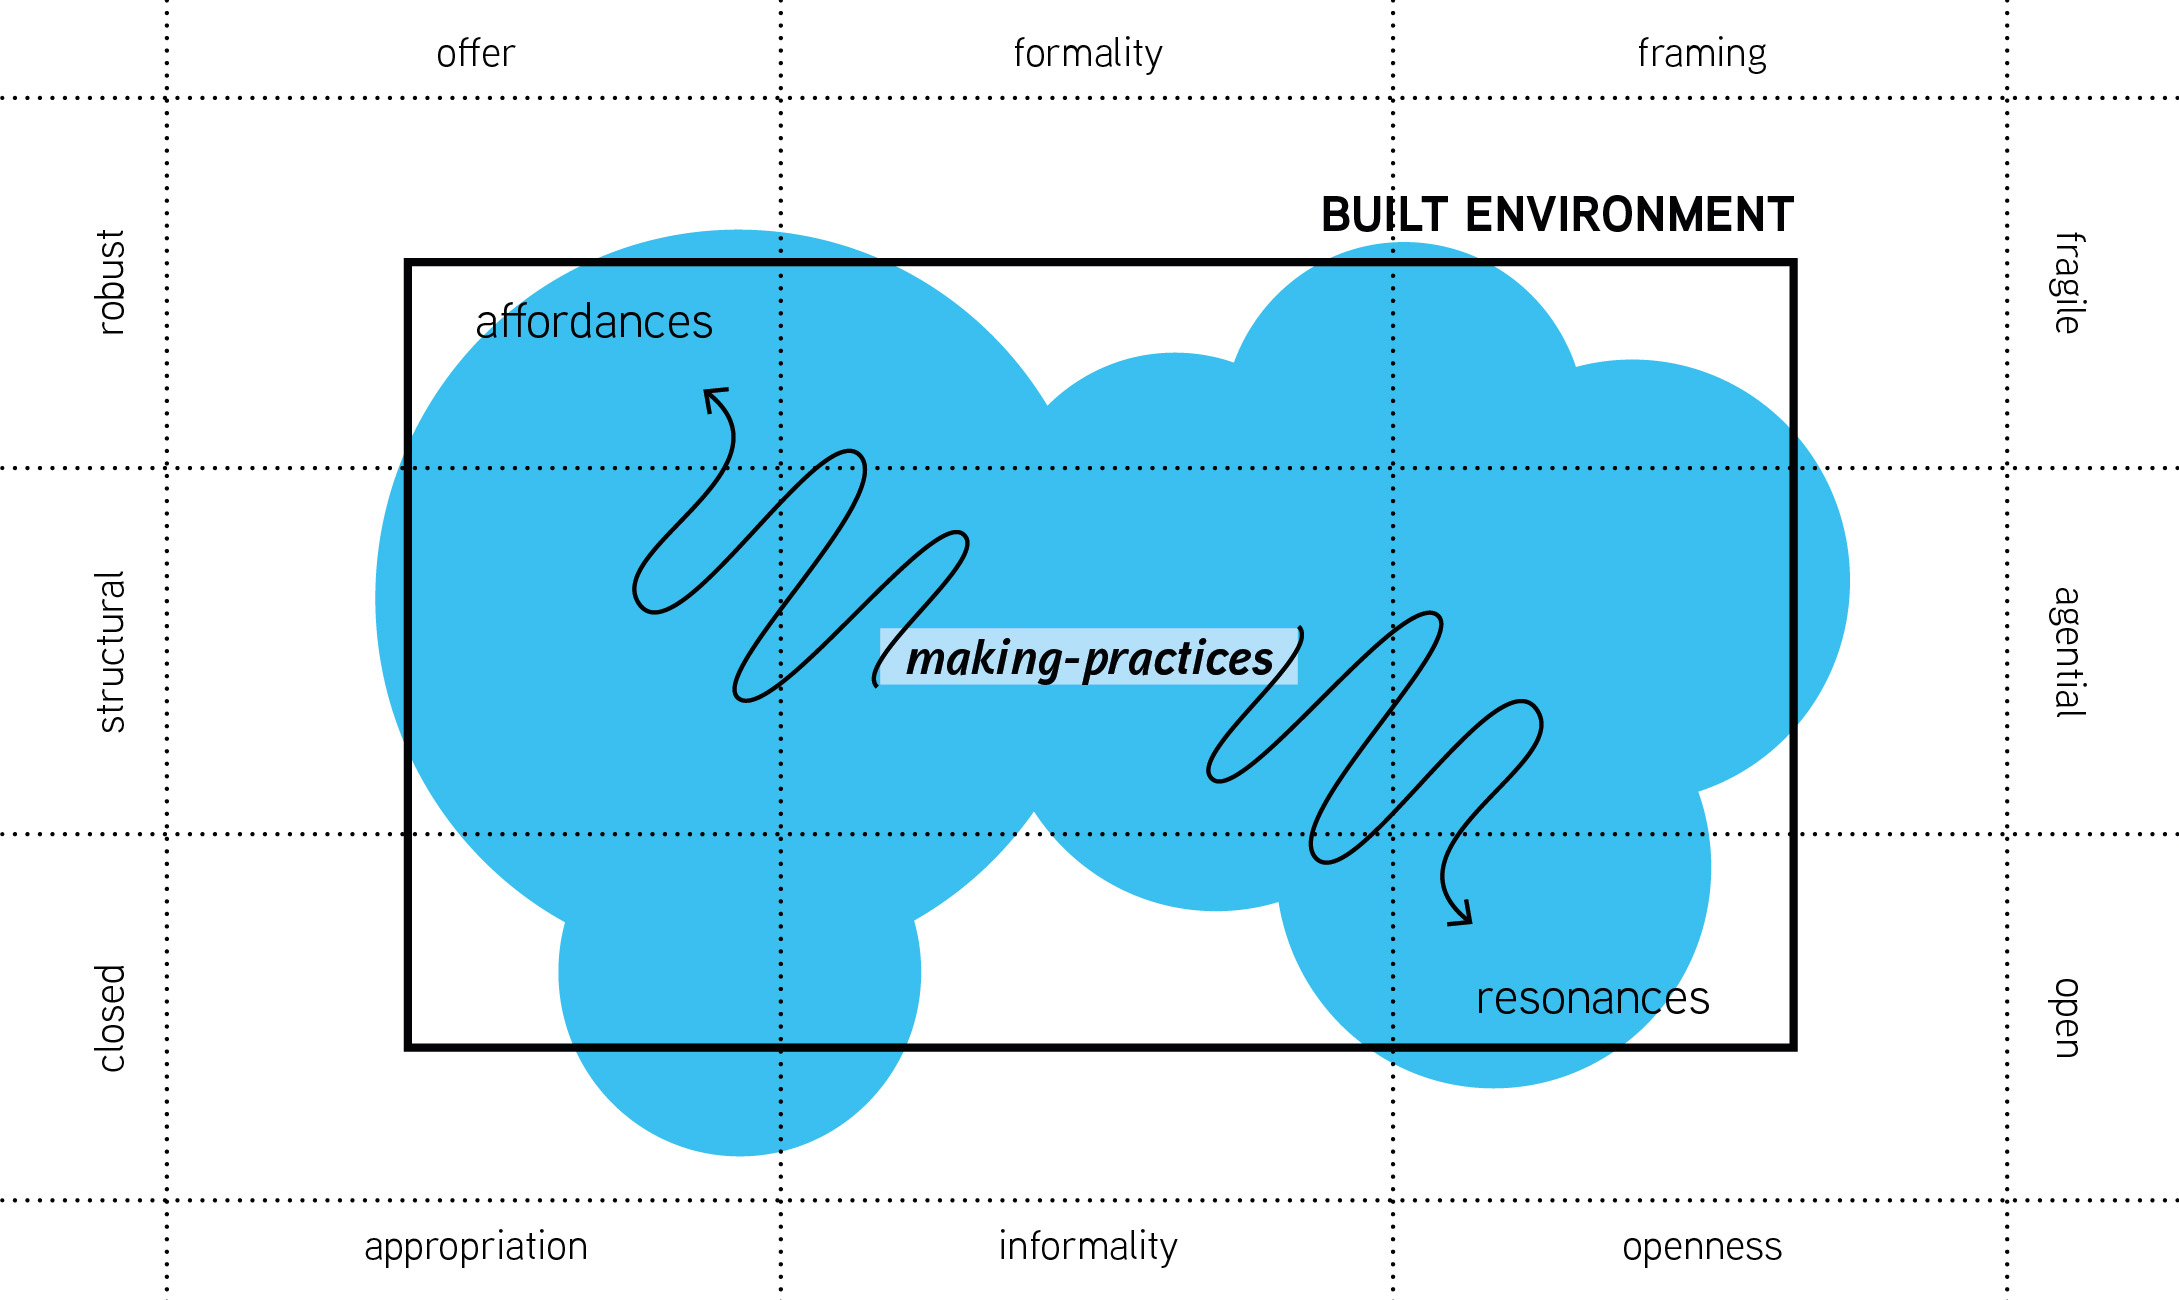 This figure shows a matrix in which approaches of making-practices are mapped as a blue cloud.